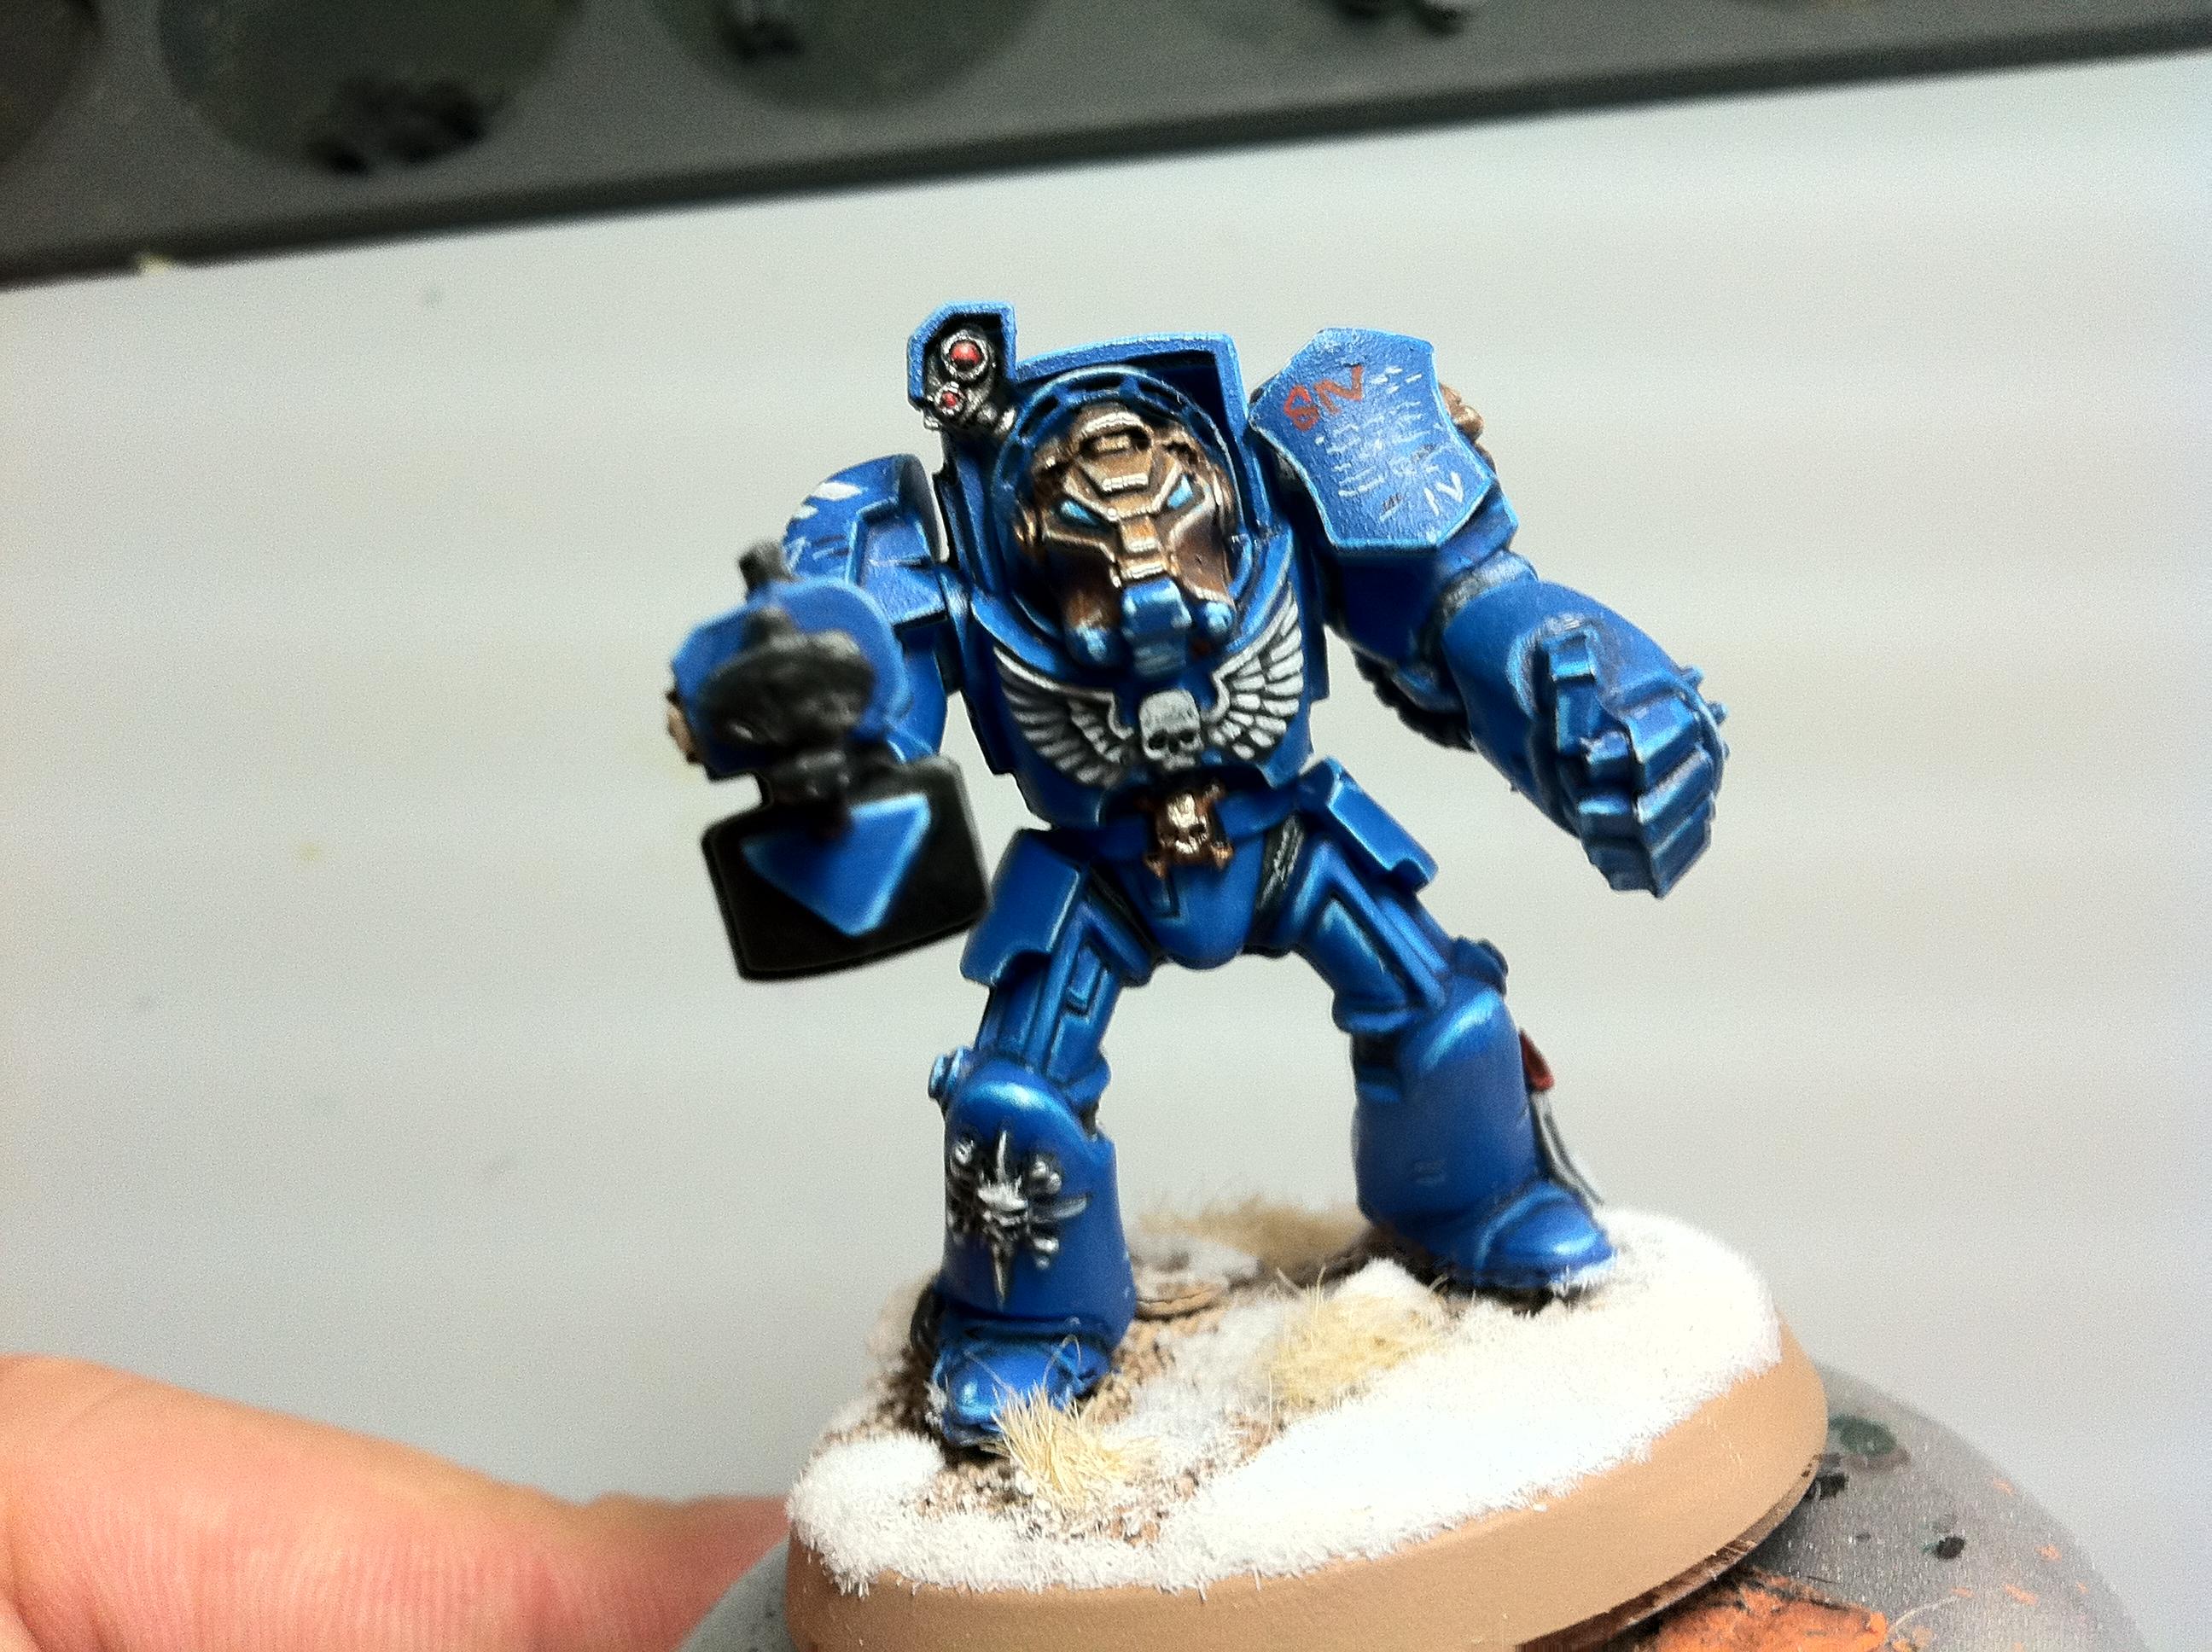 Power Fist, Space Marines, Tactical Dreadnought Armour. Storm Bolter, Terminator Armor, Warhammer 40,000